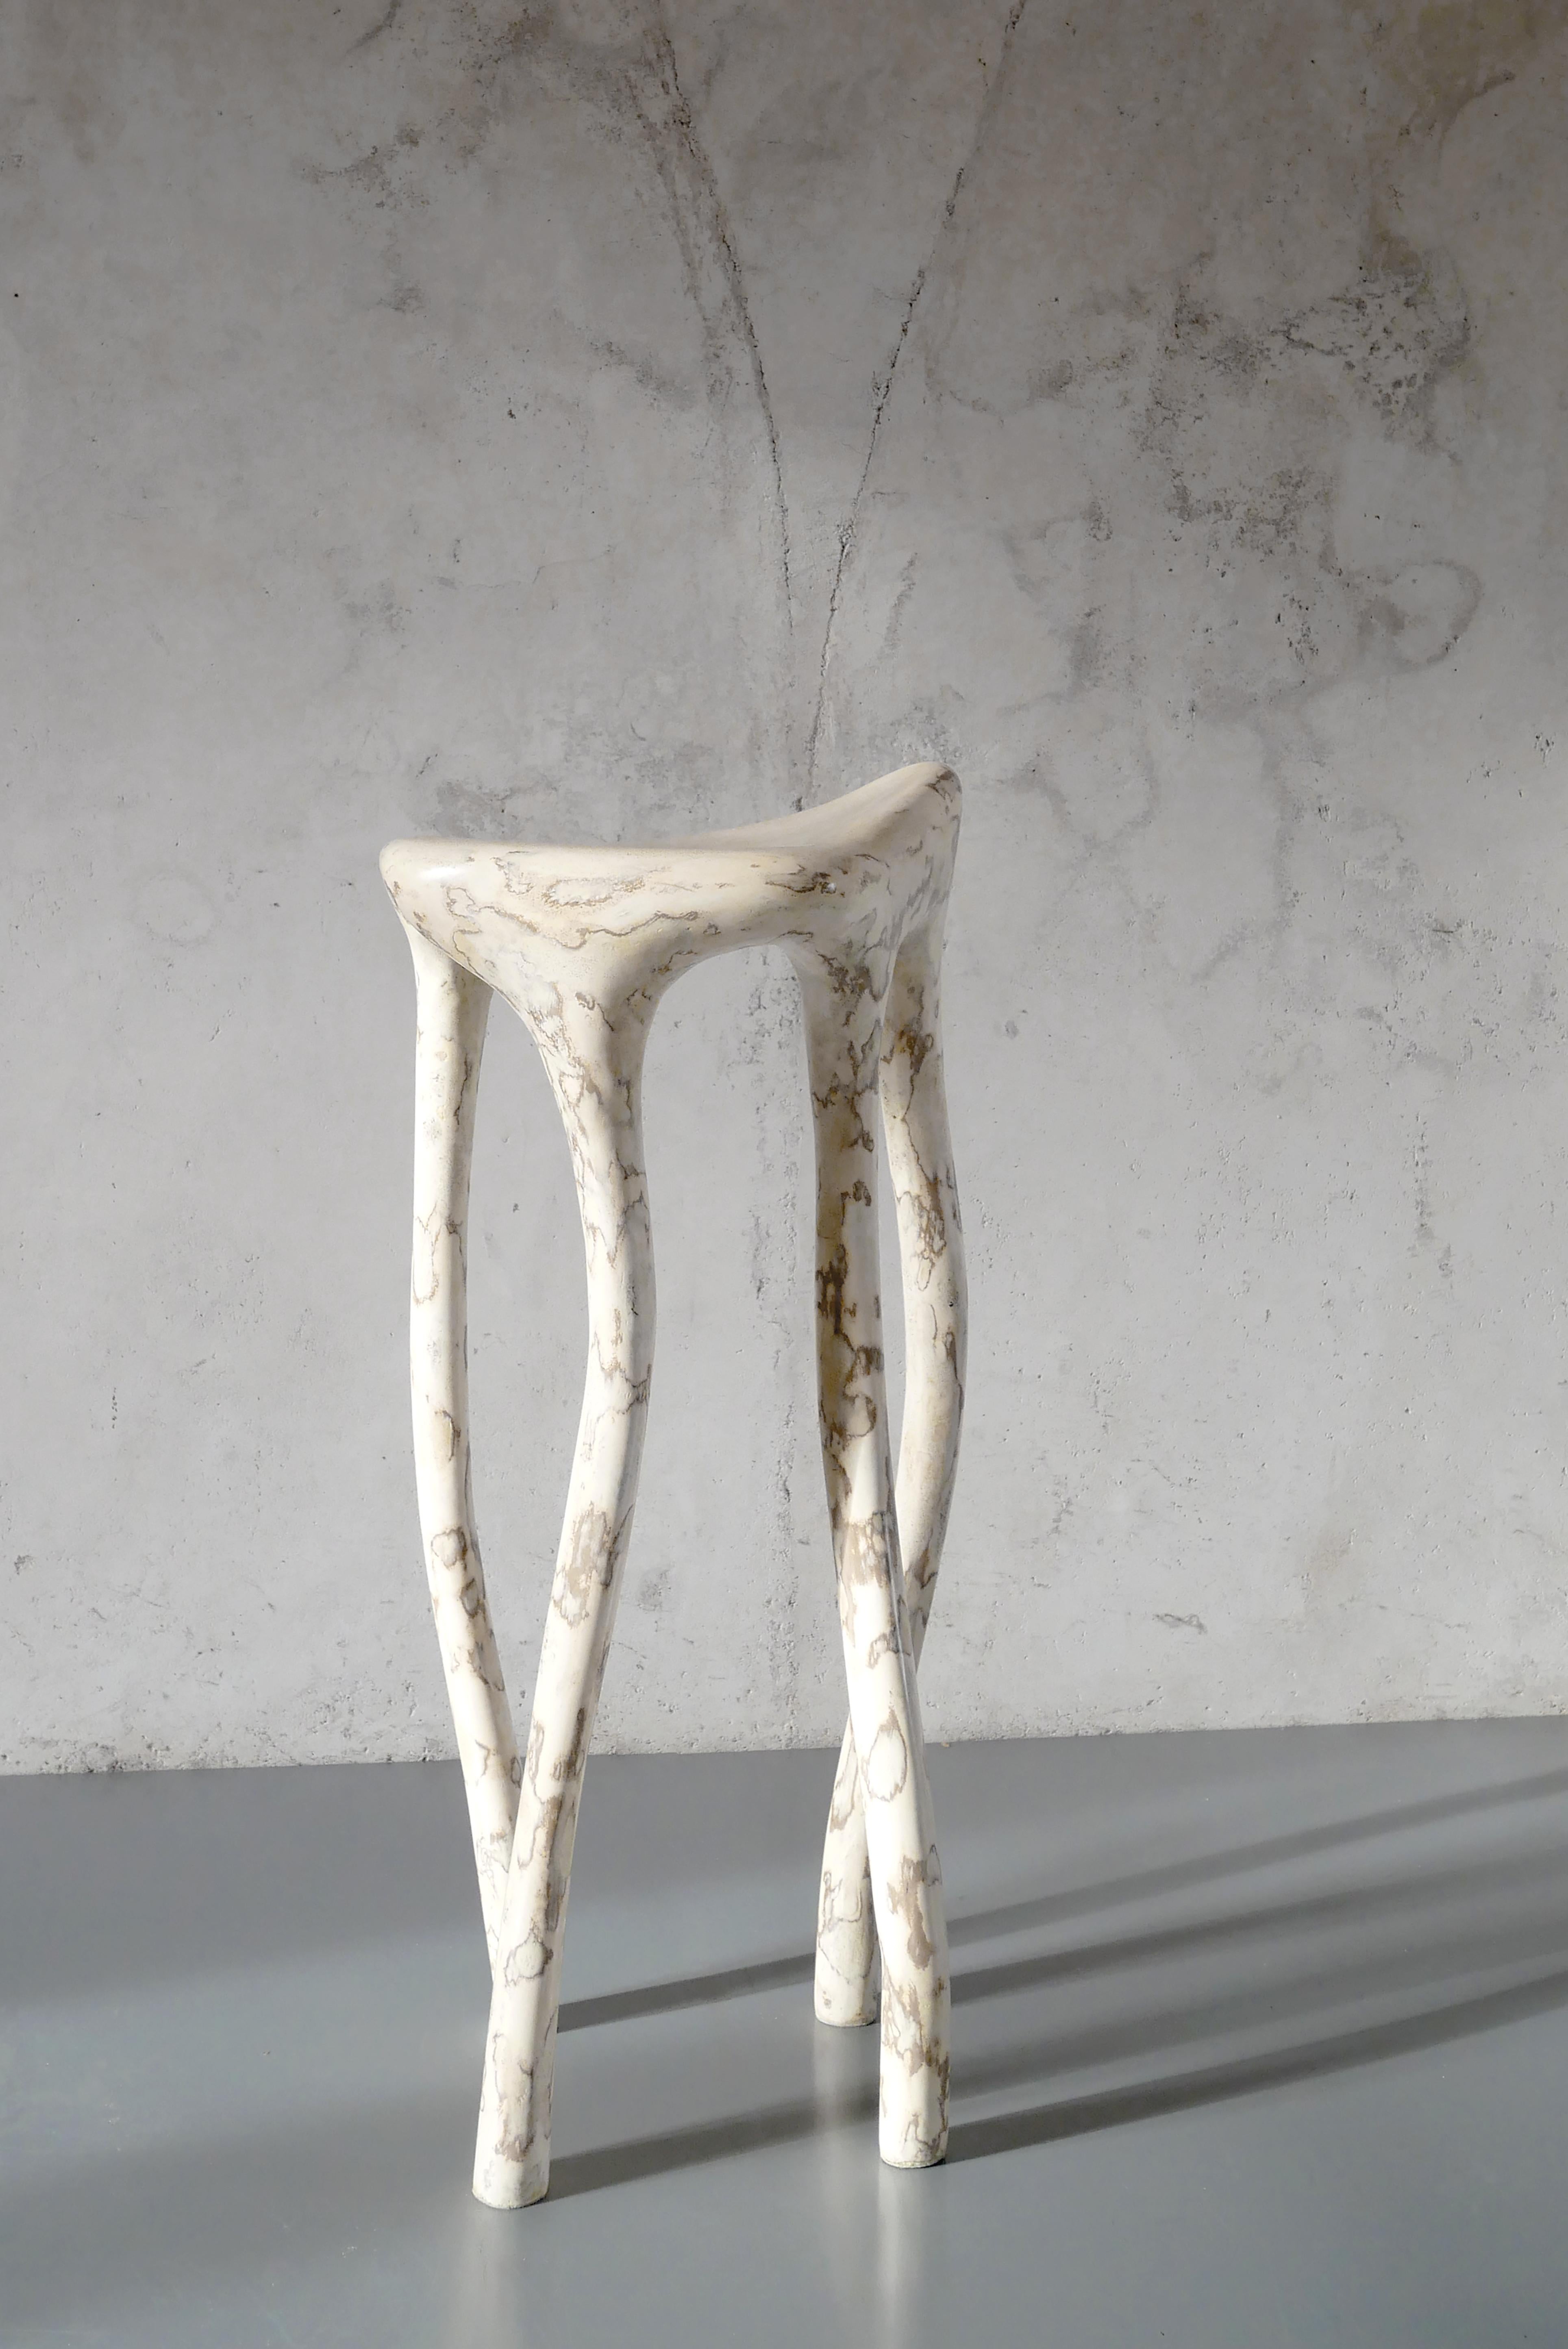 Tabouret haut II by Elissa Lacoste
Dimensions: 37 x 40 x H 75 cm
Materials: Steel, A1 resin, vermiculite pigment, fiberglass.


Master of Arts in Fine Art and Design, Design Academy Eindhoven, The Netherlands.
Exchange in Latvian Art Academy,